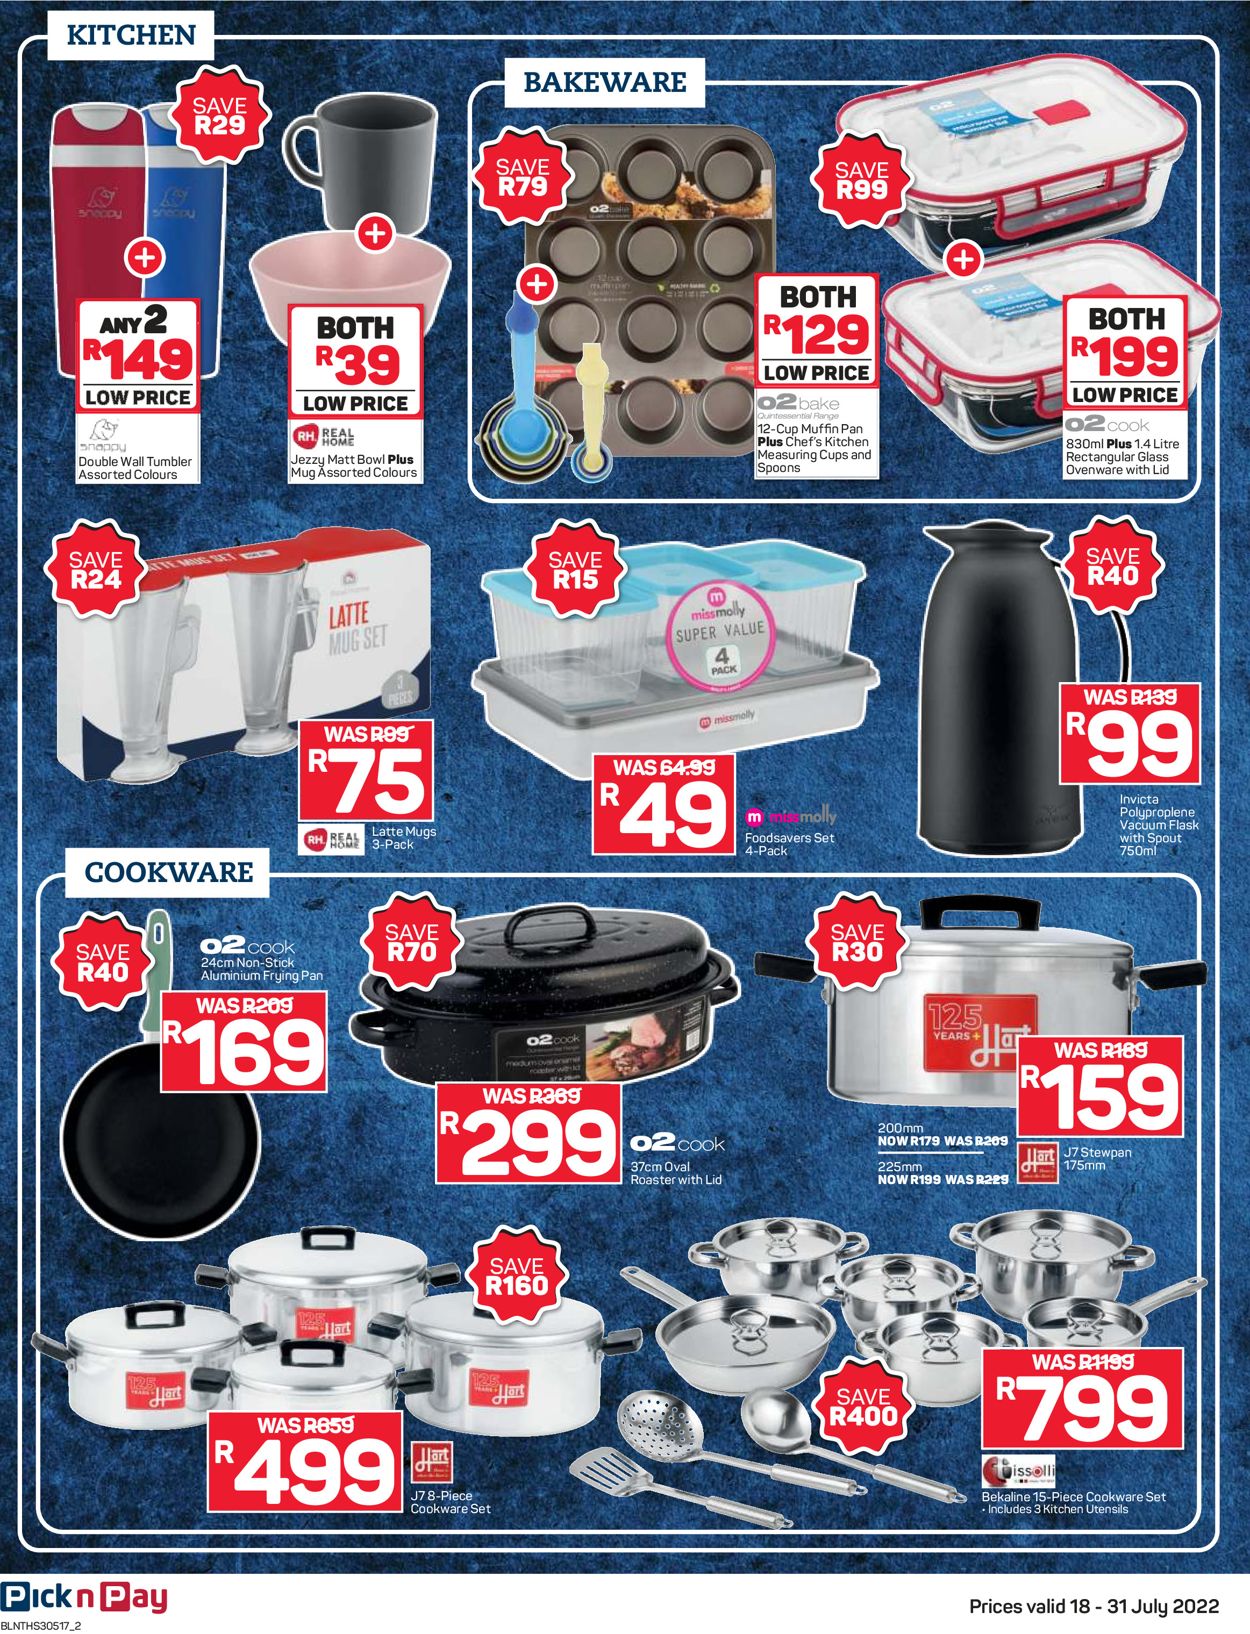 Pick n Pay Catalogue - 2022/07/18-2022/07/31 (Page 2)